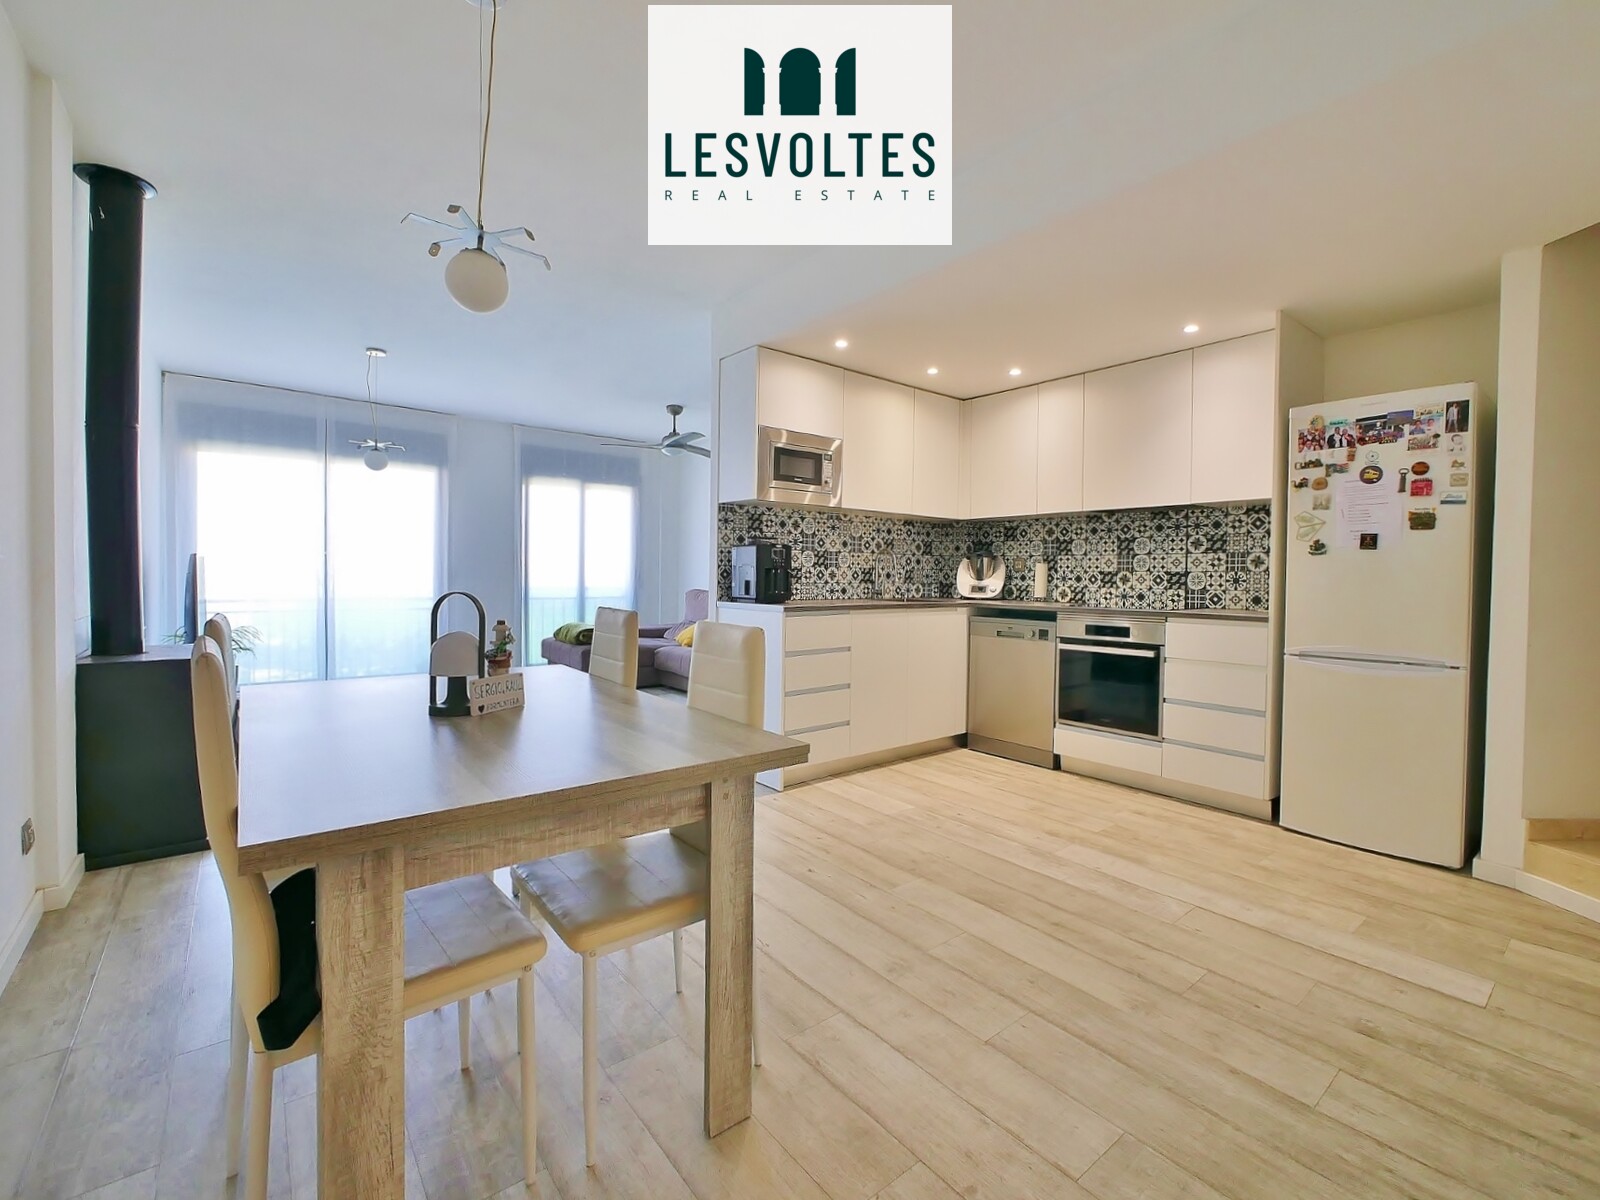 SPACIOUS DUPLEX PENTHOUSE WITH 2 BEDROOMS AND PARKING SPACE IN PALAFRUGELL. FLAWLESS.